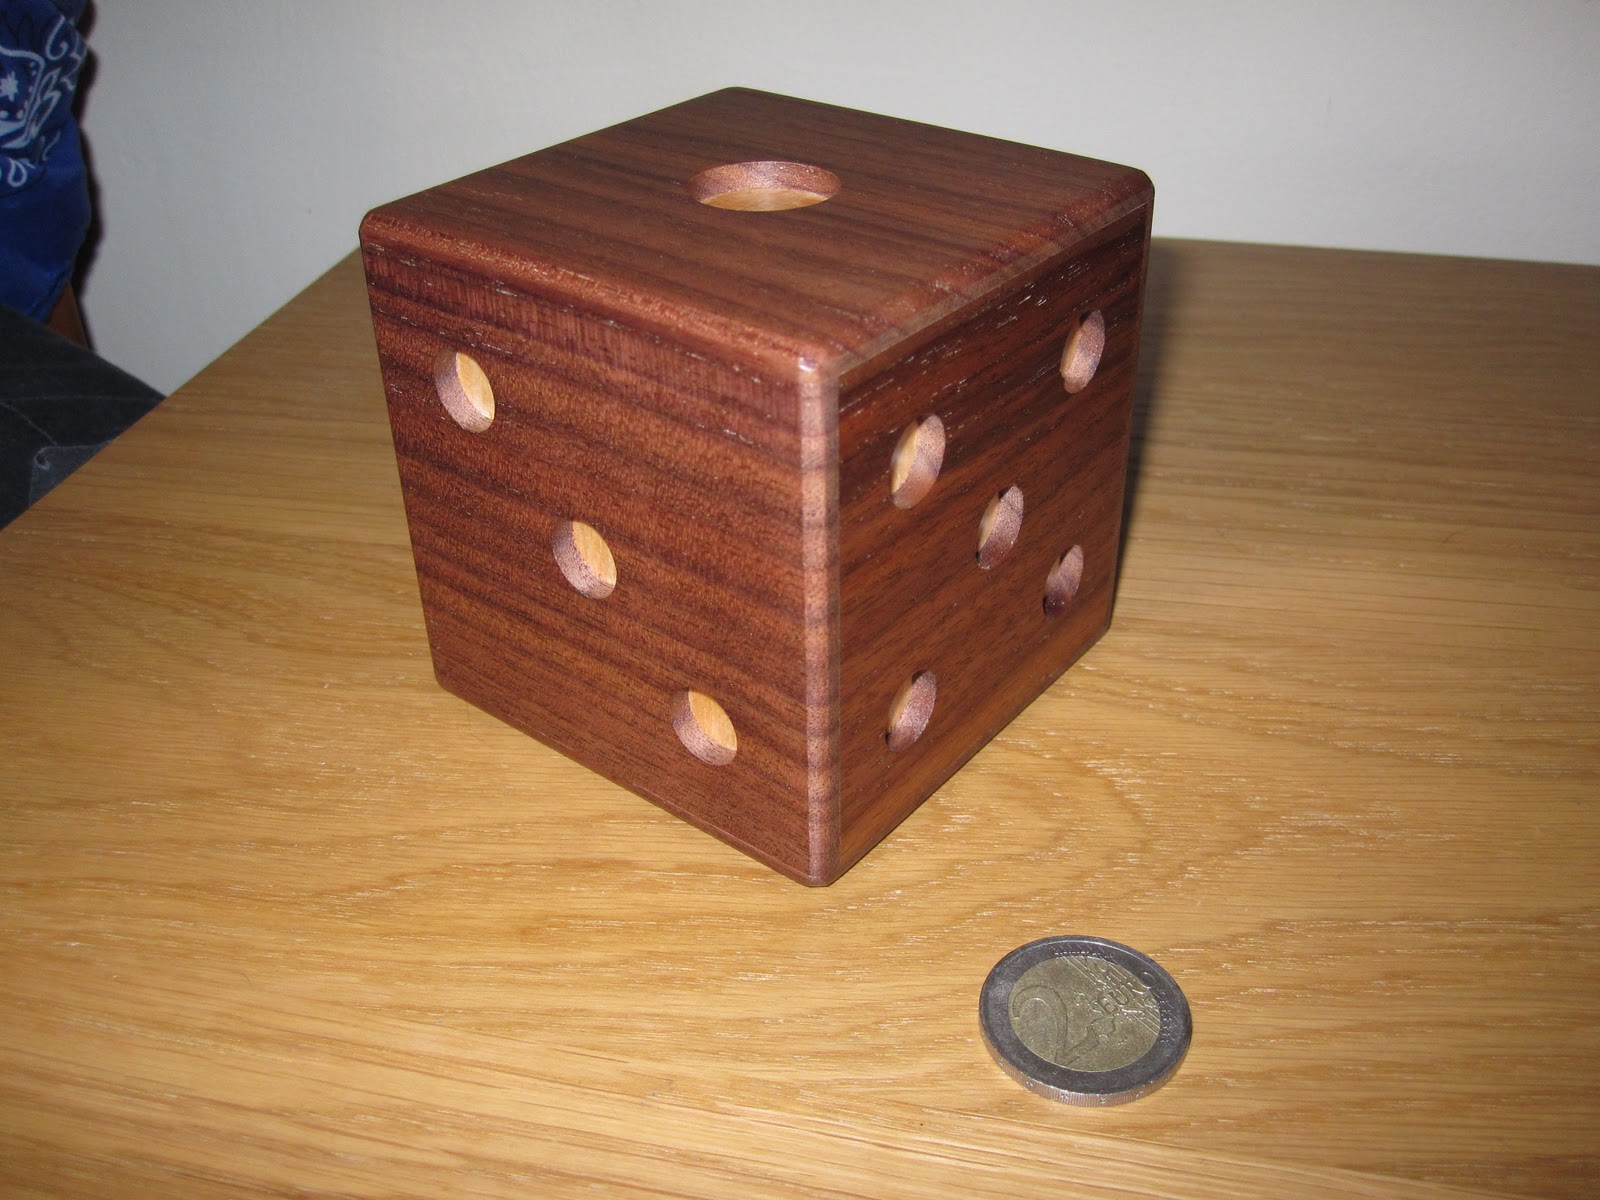 Best Woodworking Plans And Guide: Free Wood Puzzle Box Plans Wooden Plans